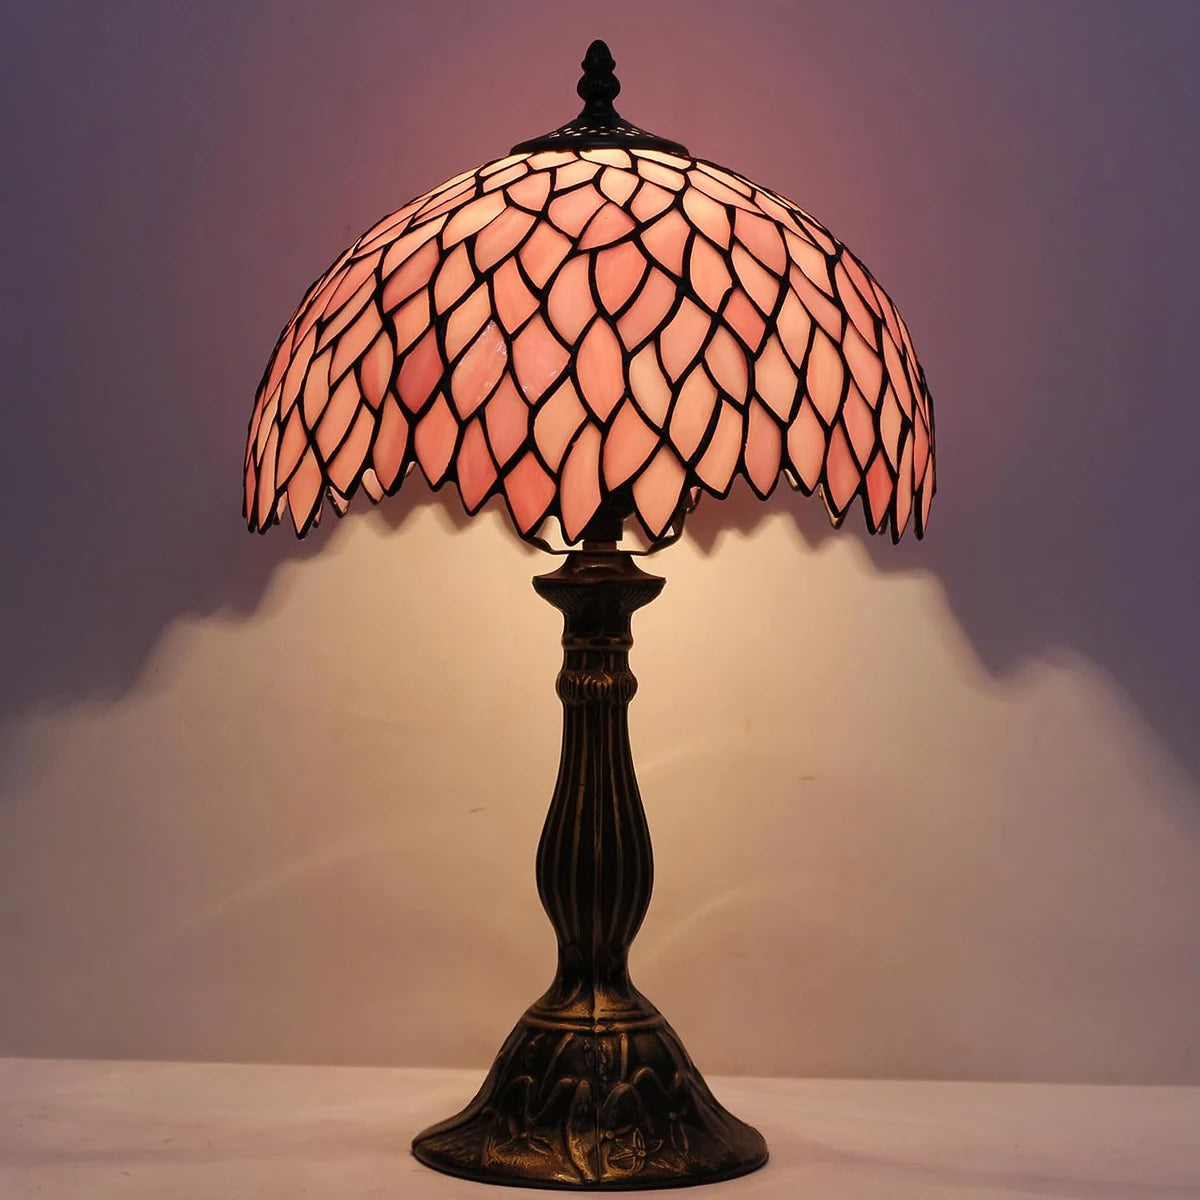 Tiffany Table Lamp Pink Wisteria Style Stained Glass Desk